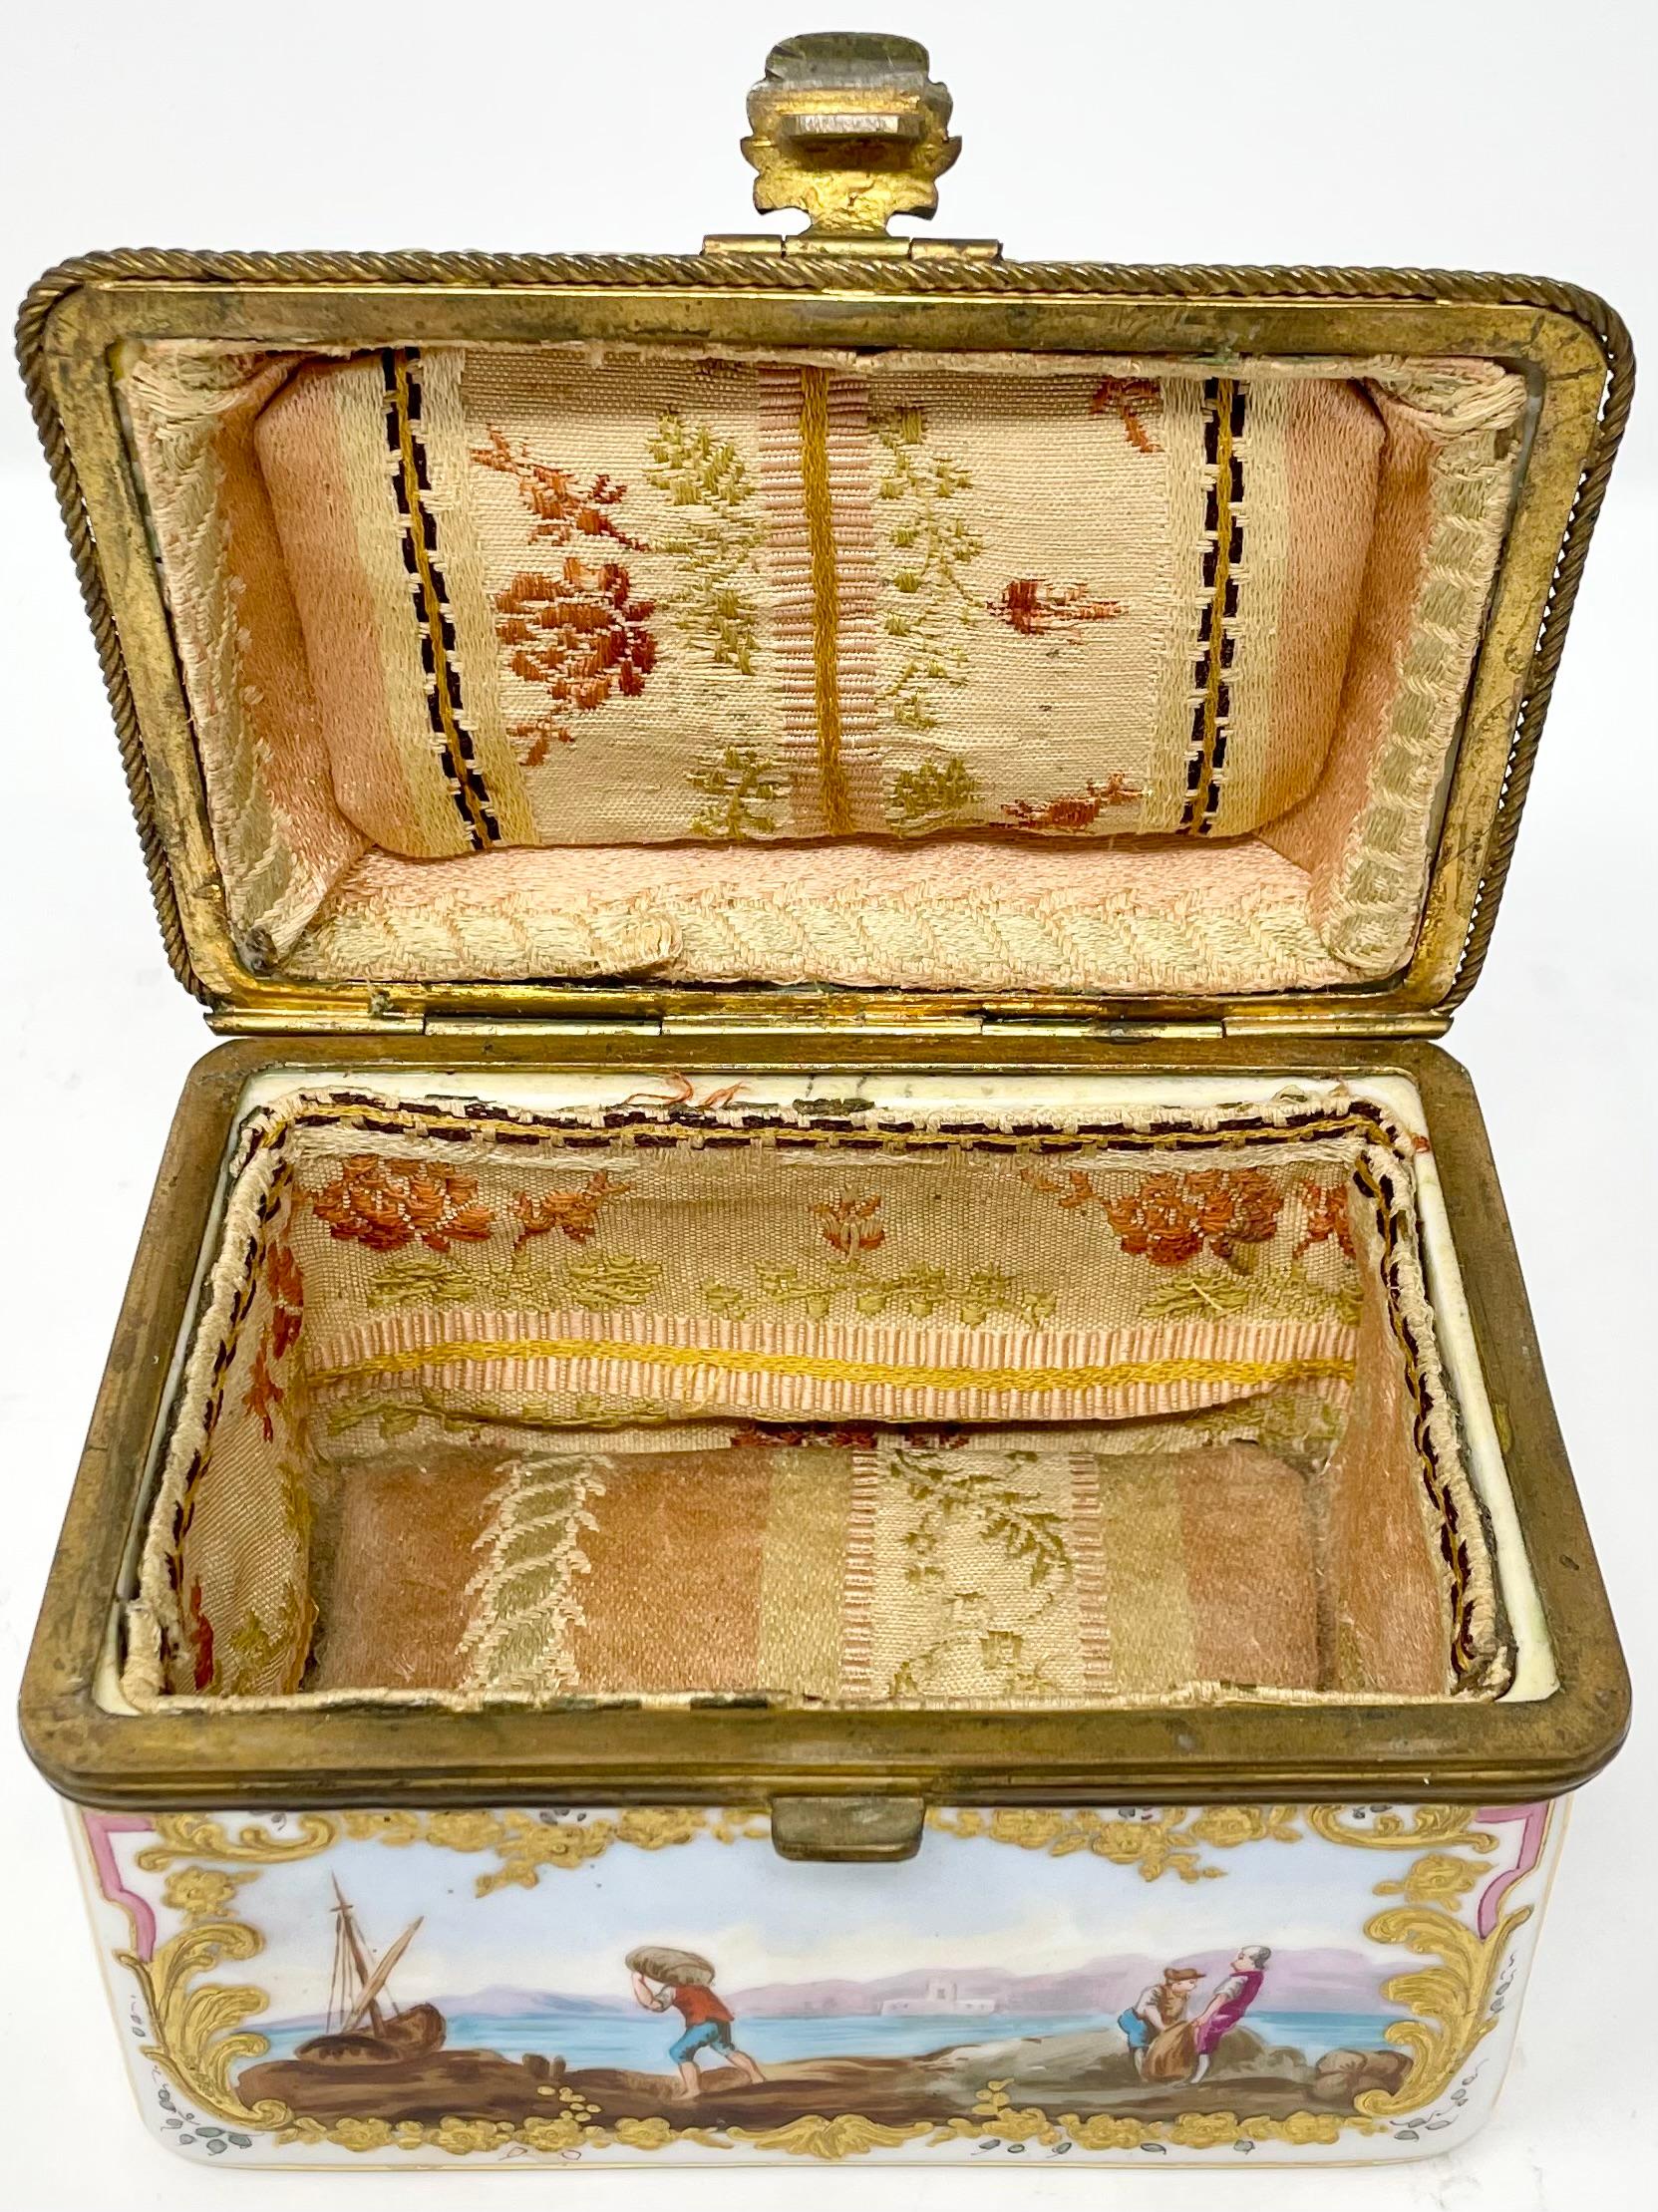 Antique German Dresden Porcelain Box with Delicate Painting, Circa 1860-1870. For Sale 4